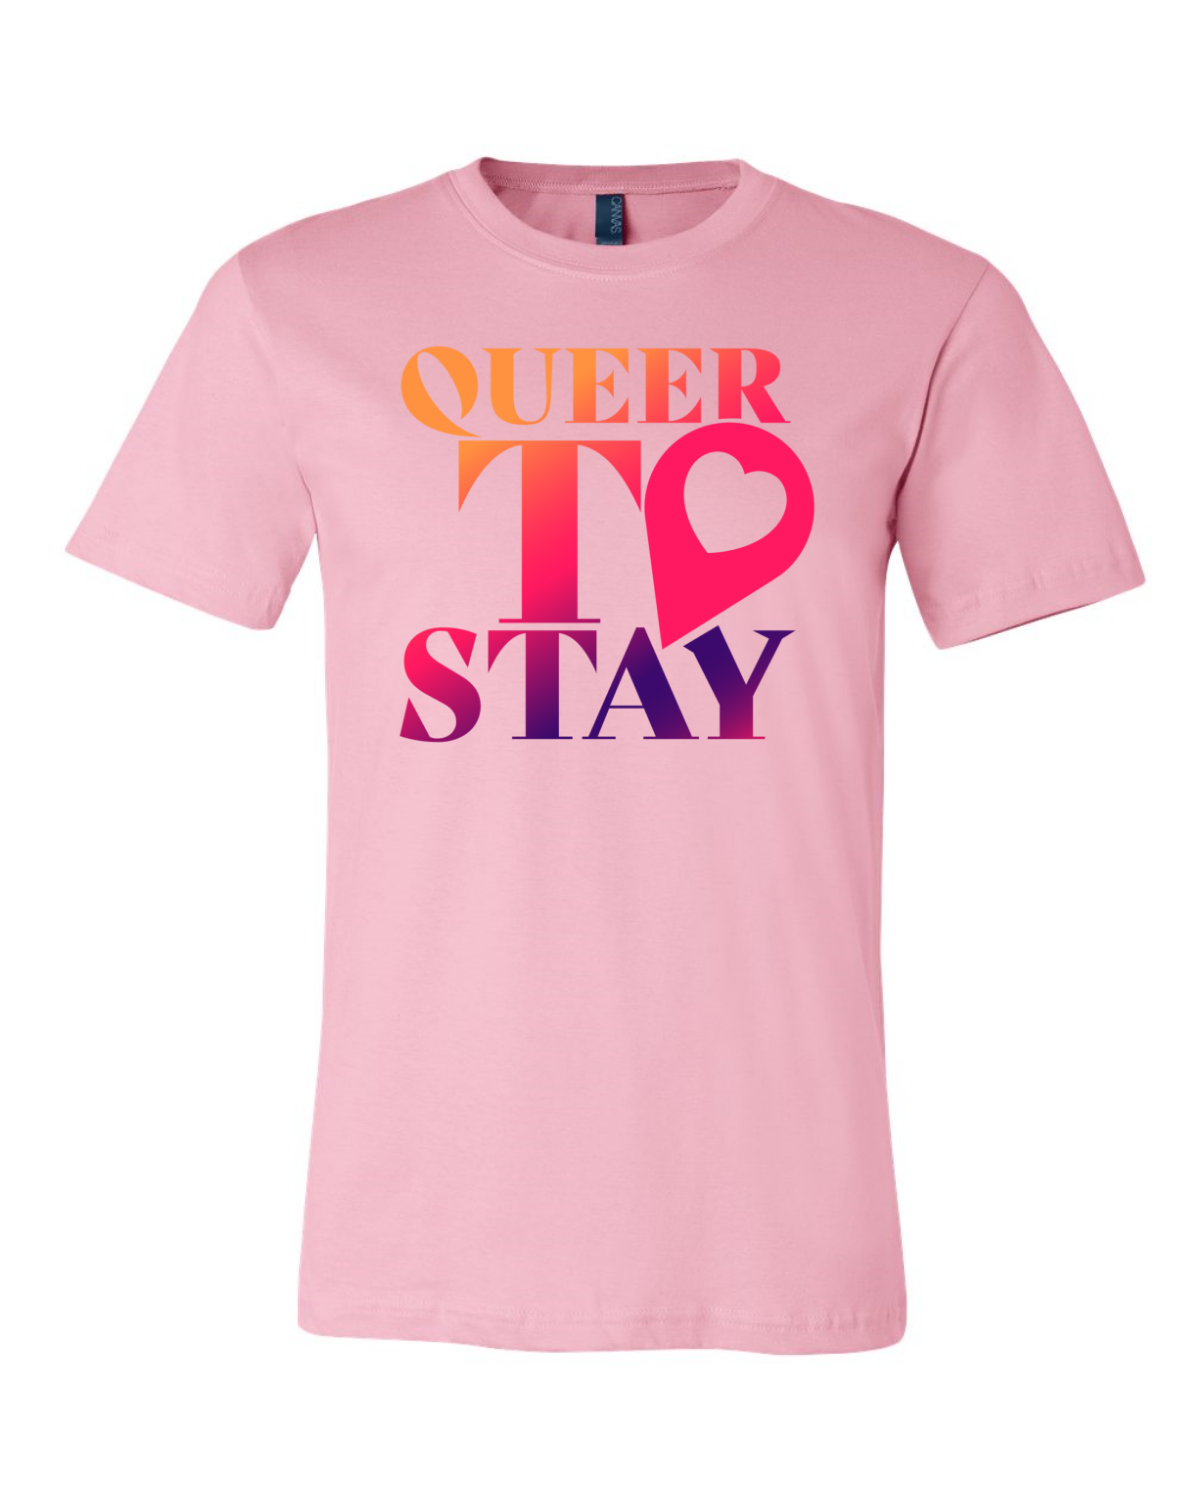 SHOWTIME Queer to Stay Logo Adult Short Sleeve T-Shirt